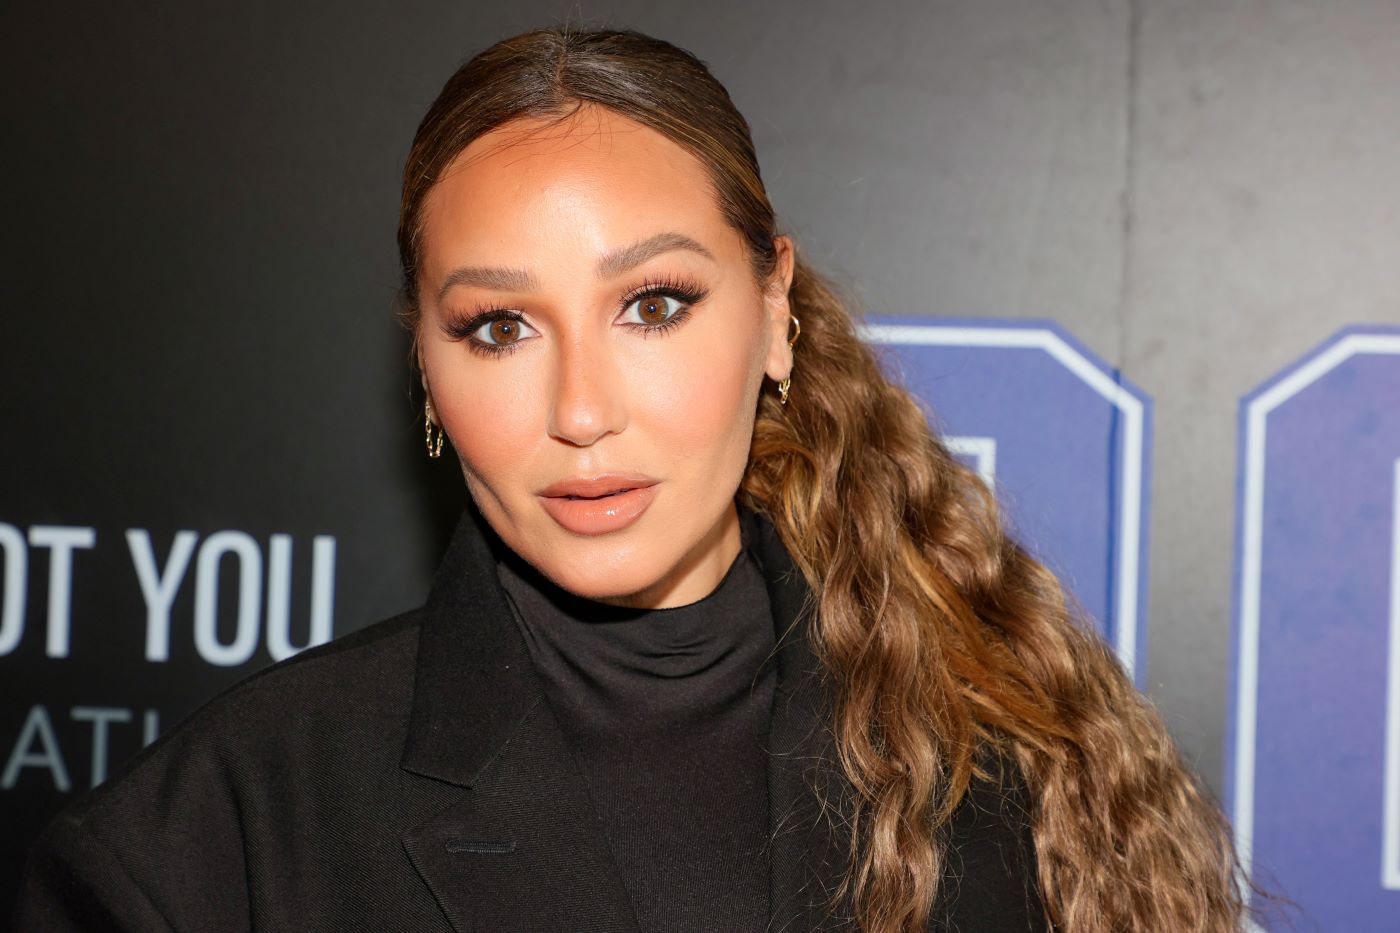 ‘That’s So Raven’: Adrienne Bailon Left the Show Because of Behind-the-Scenes Drama